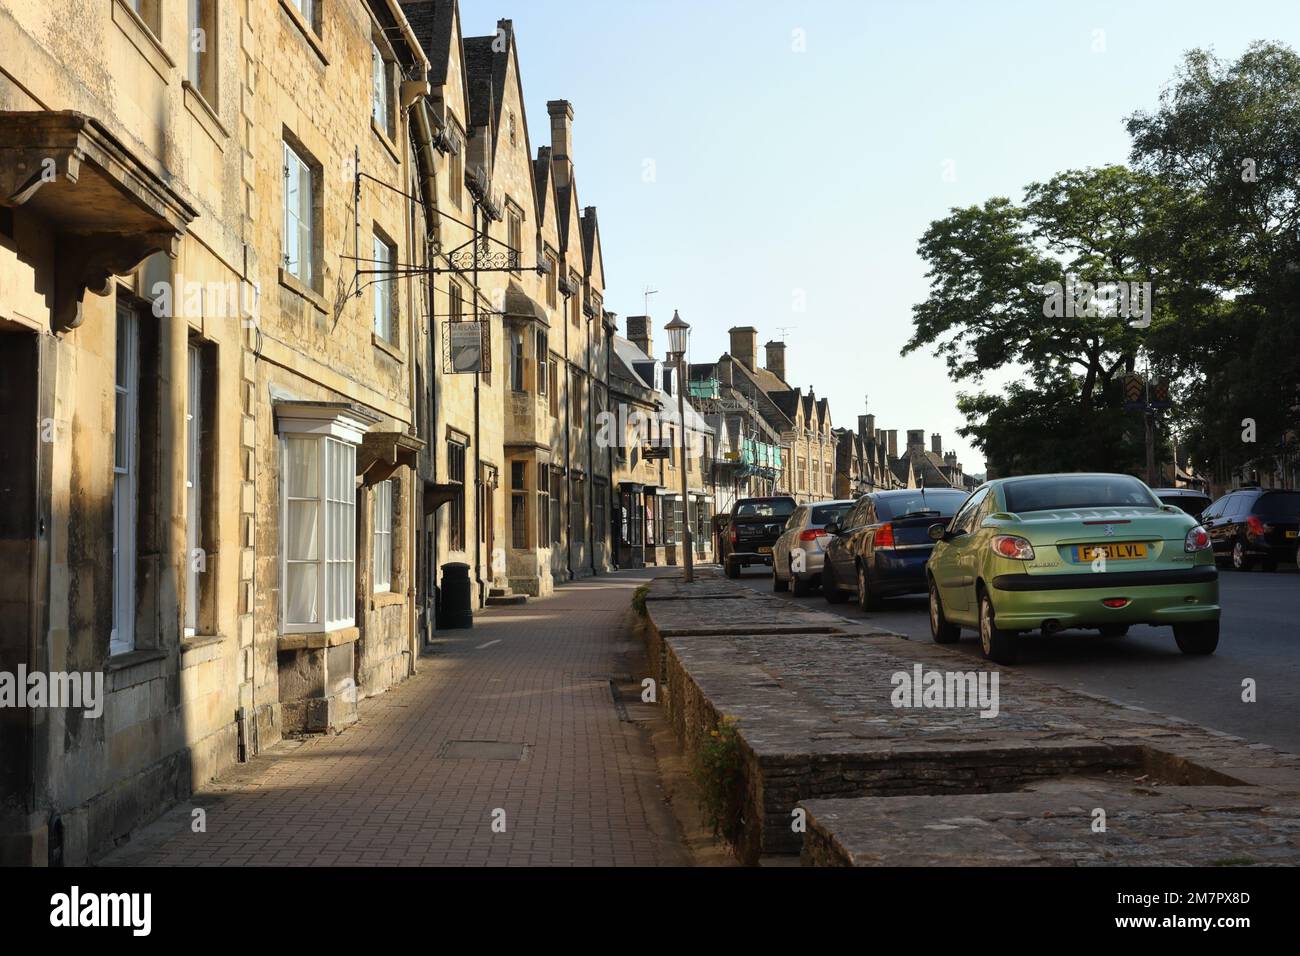 View along the High Street in Chipping Campden, Gloucesteshire The Cotswolds England, Rural market town Stock Photo